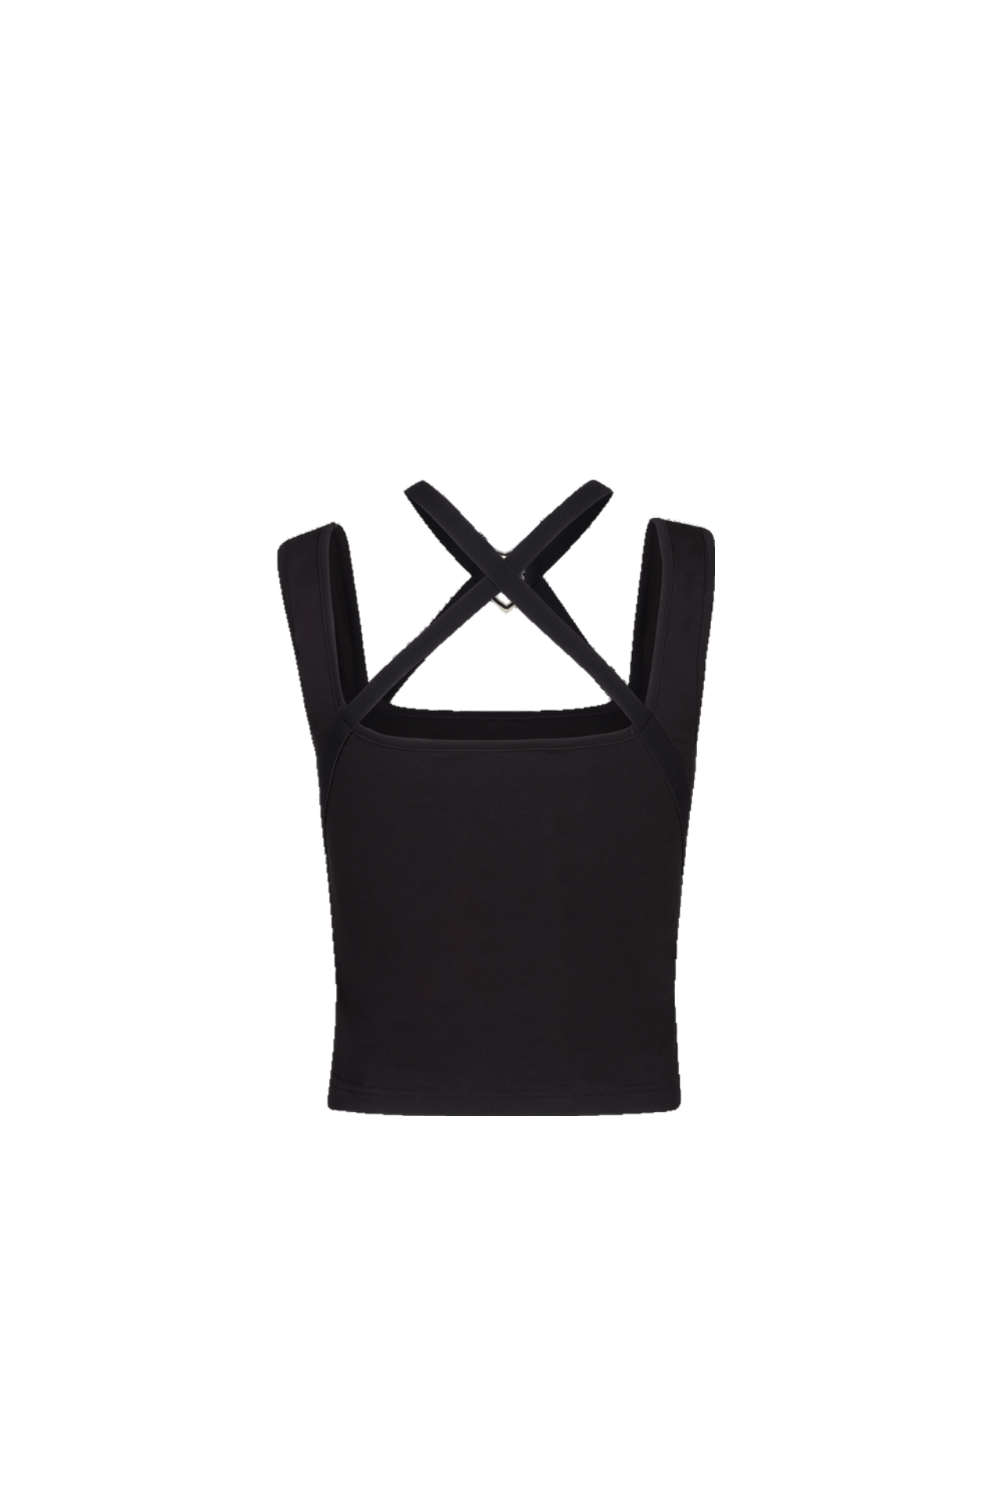 Chic Cross-Strap Halter Top with Heart Detail